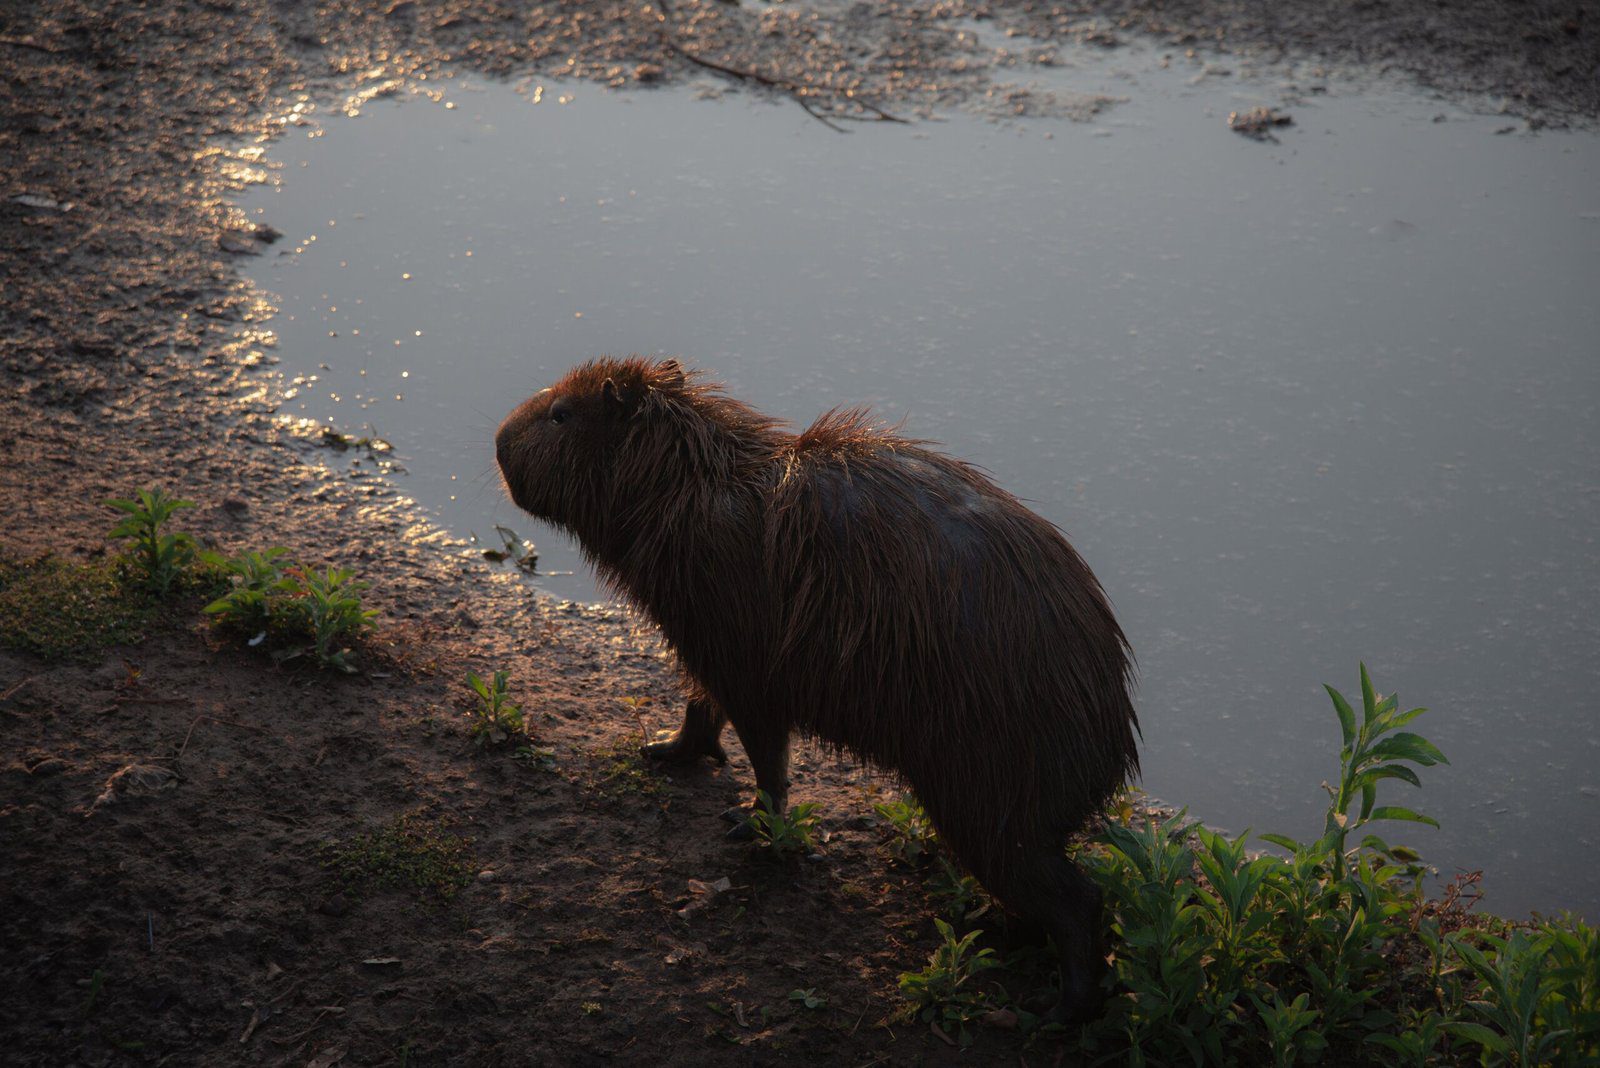 Why do capybaras live in groups?